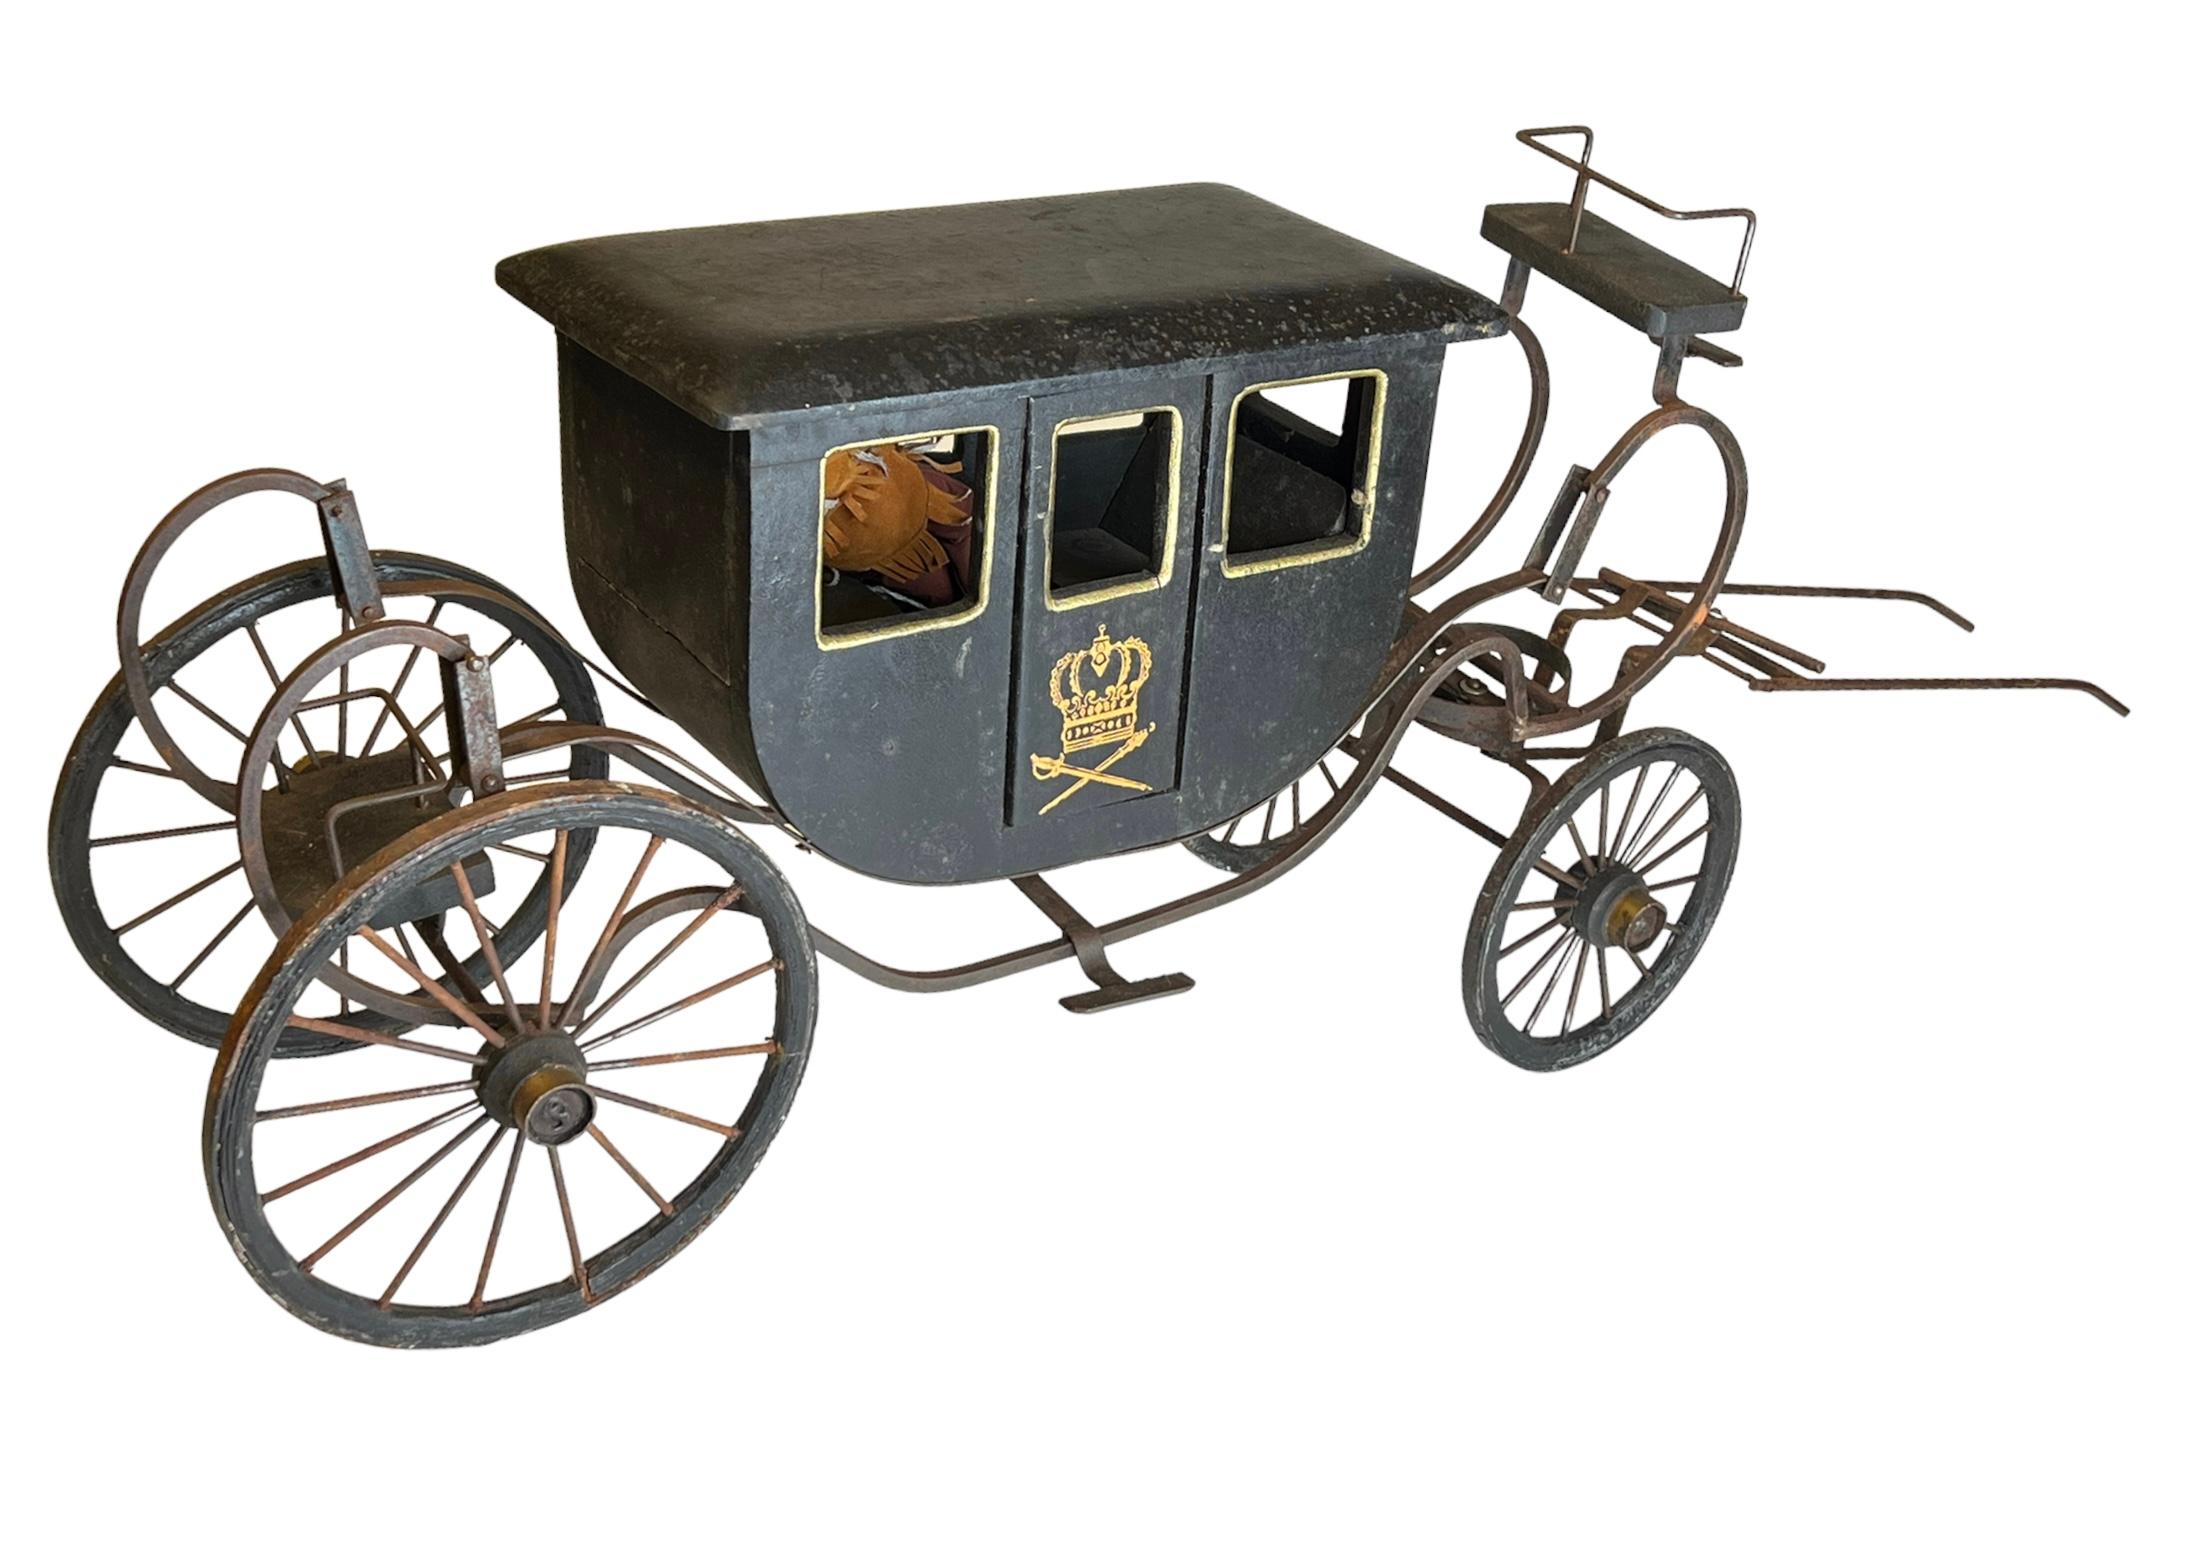 Antique mid century model of a wooden and metal horse carriage in 18th century style.